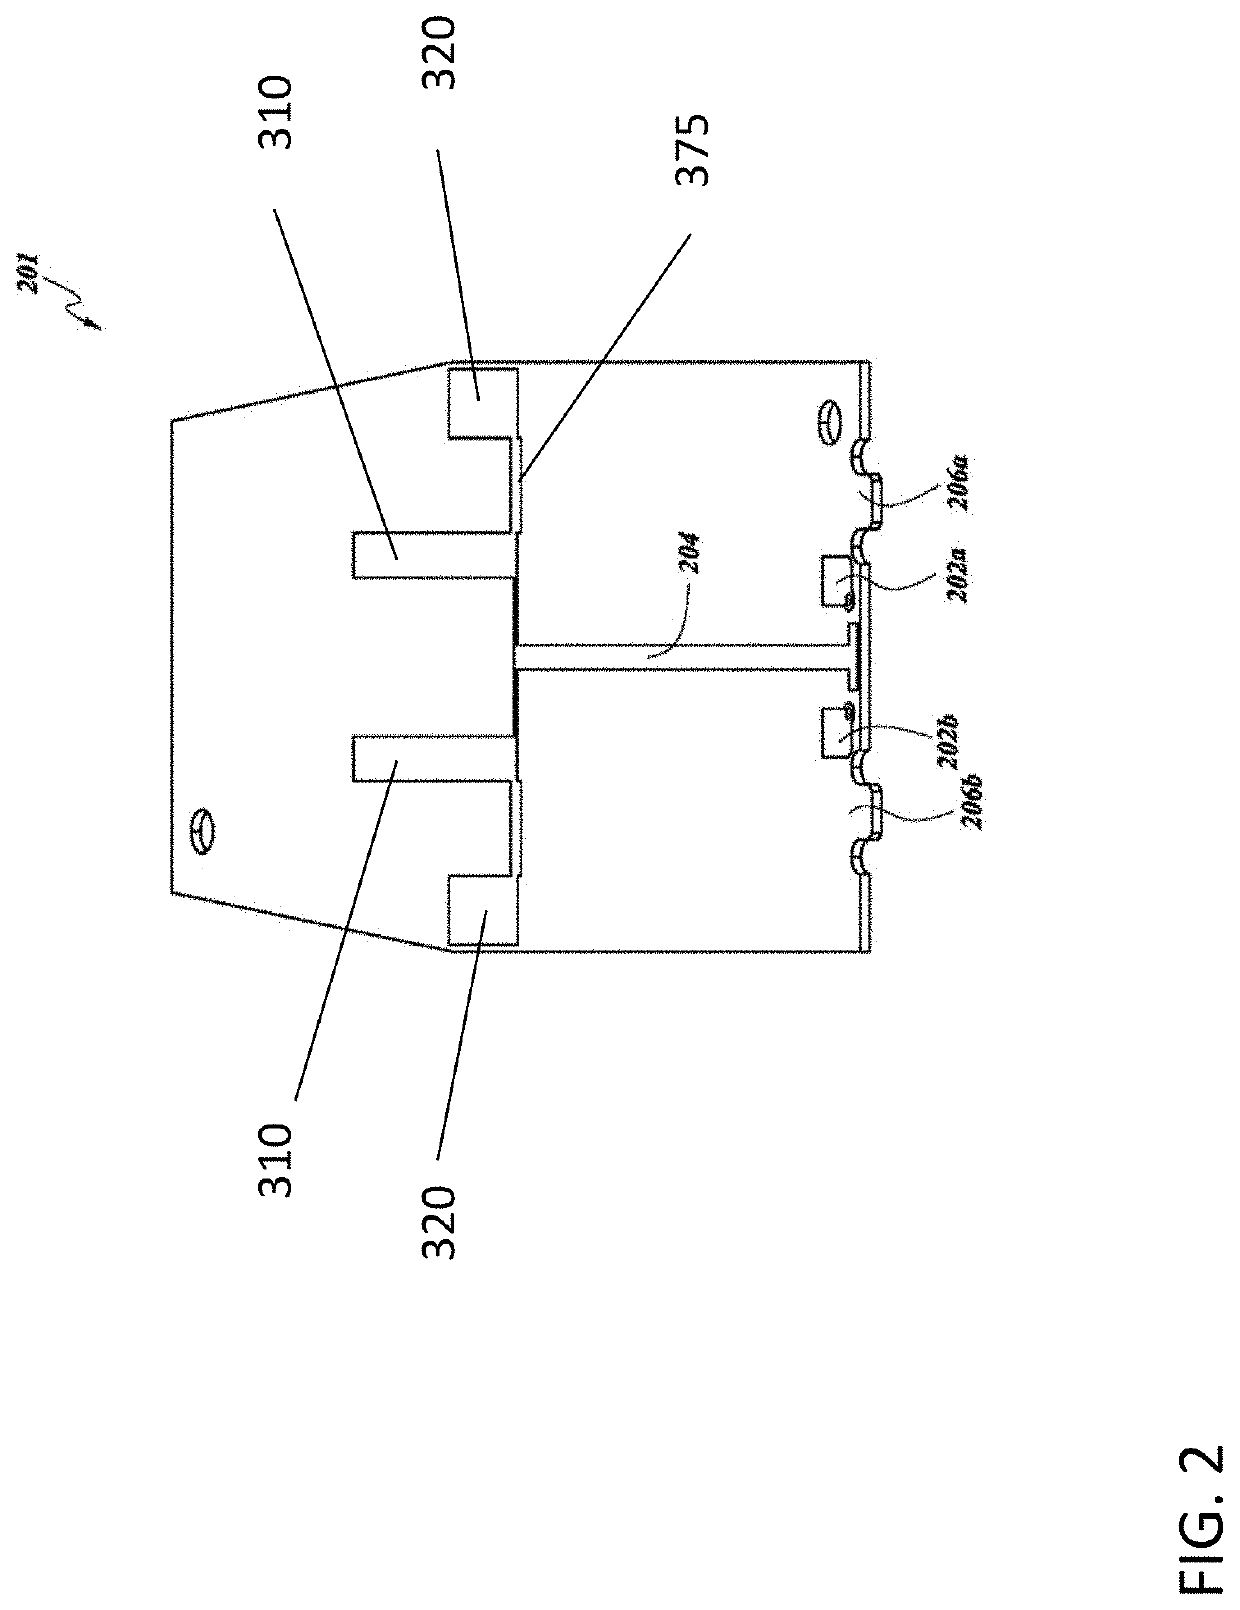 Radio frequency connectors, omni-directional WIFI antennas, omni-directional dual antennas for universal mobile telecommunications service, and related devices, systems, methods, and assemblies